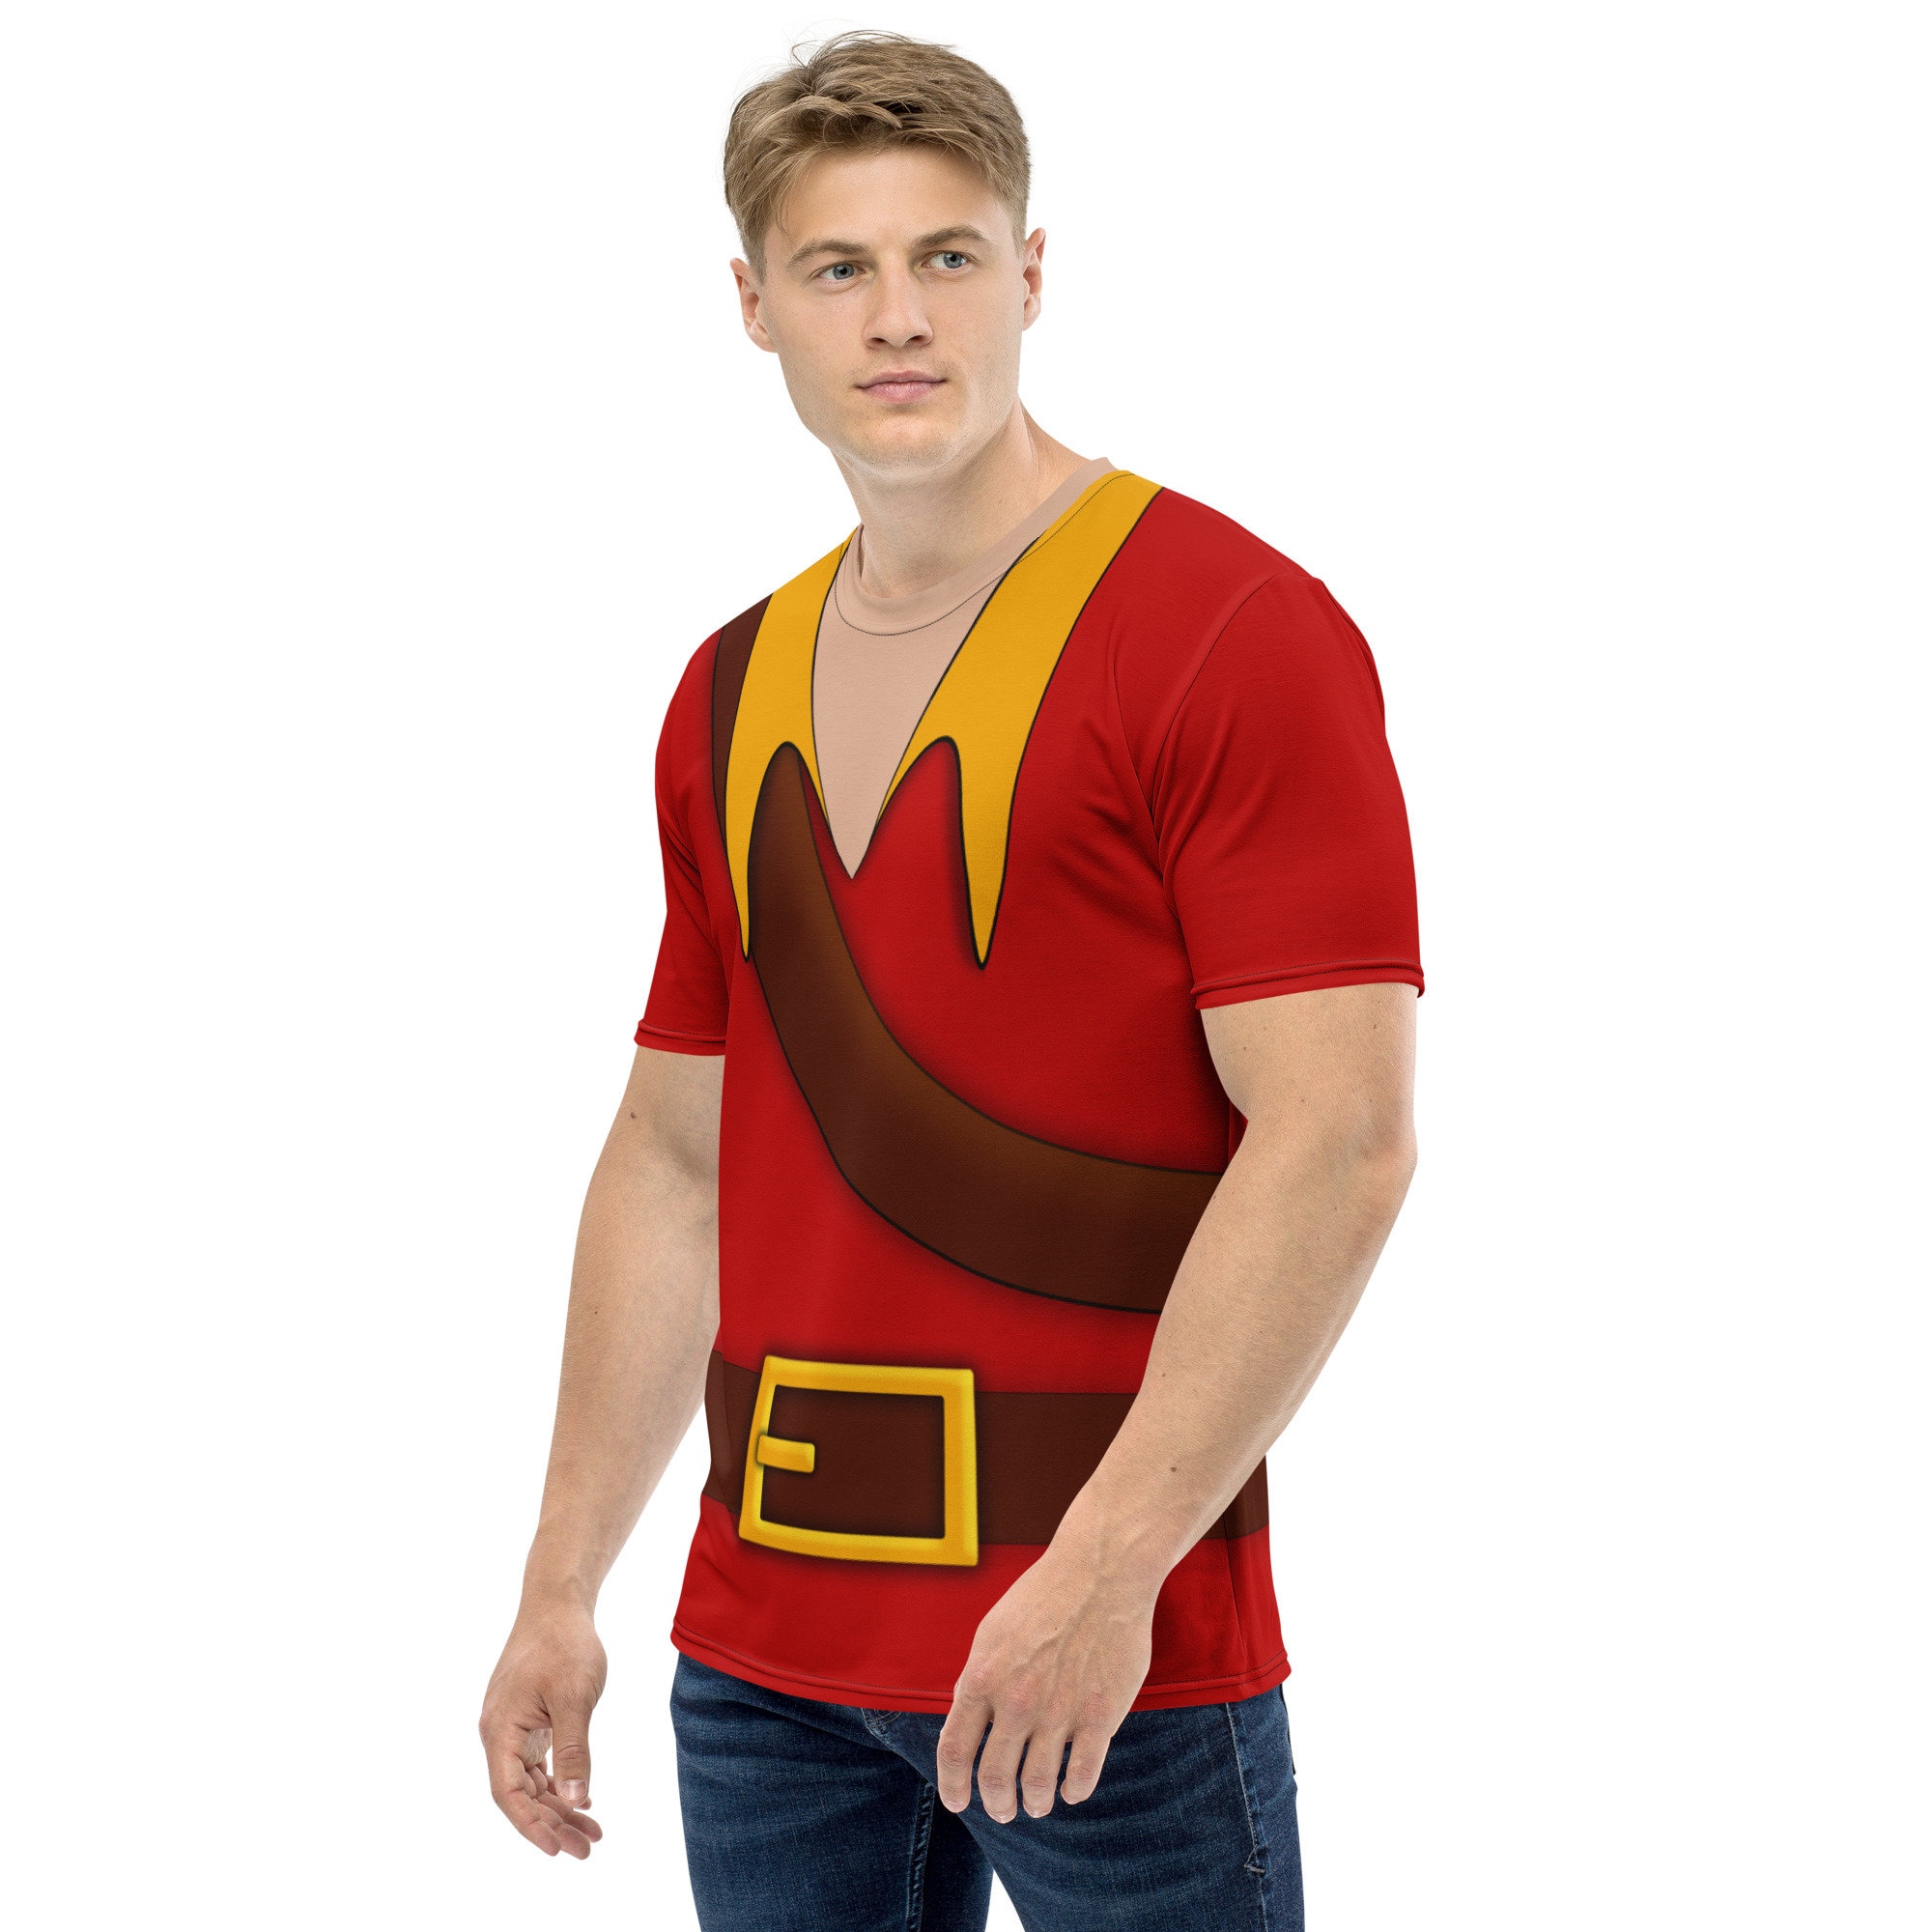 3D Shirt inspired by Gaston from Beauty and the Beast Disney